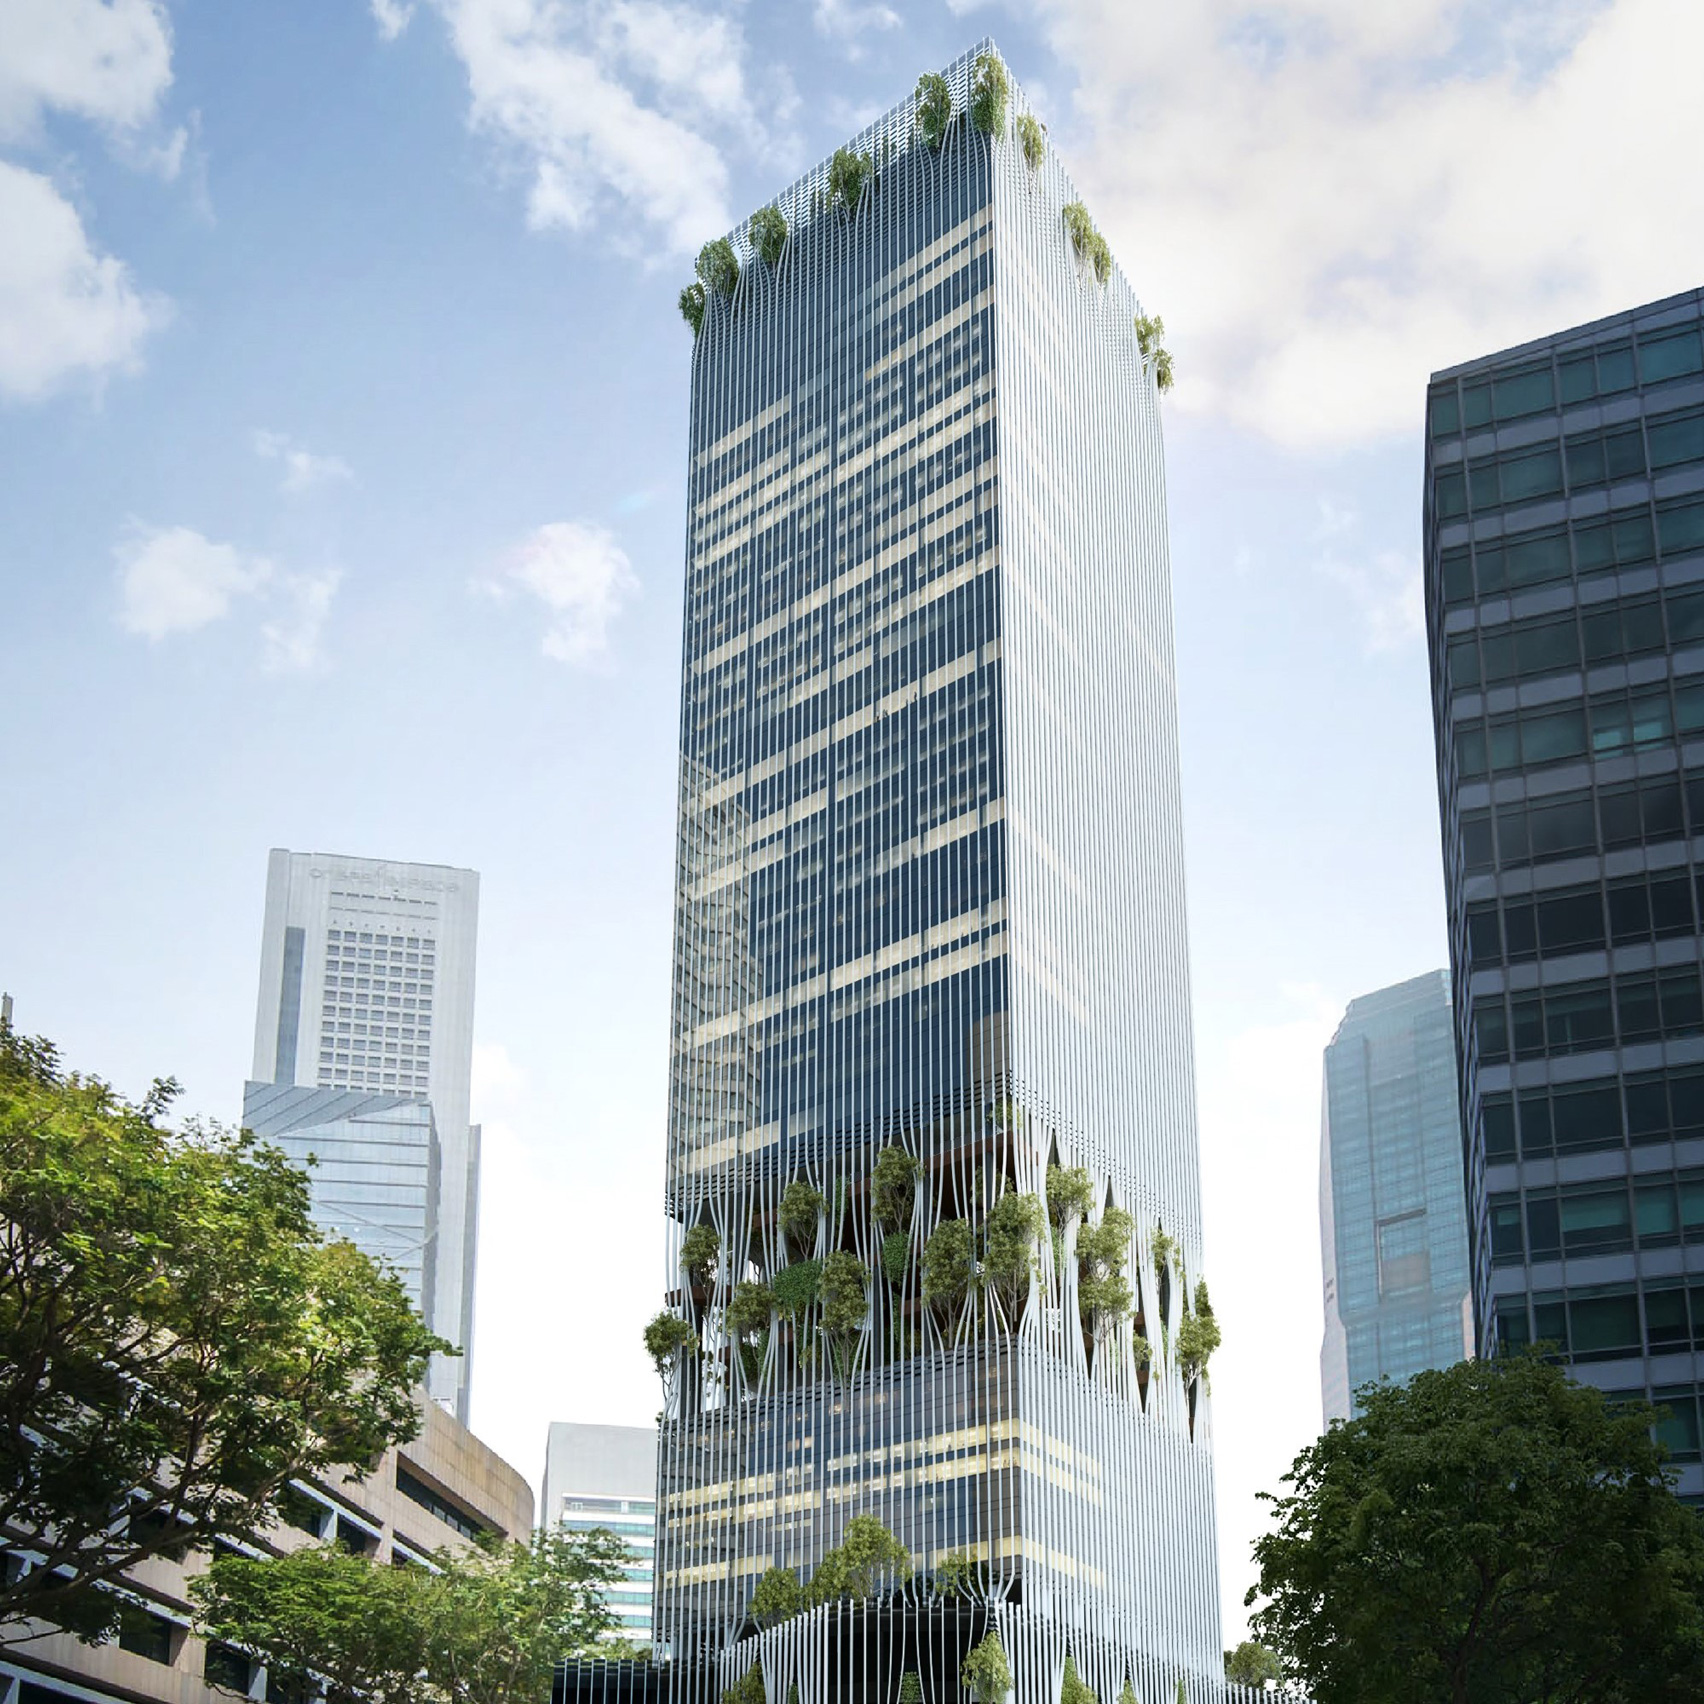 BIG and Carlo Ratti design tower with trees bursting through facade